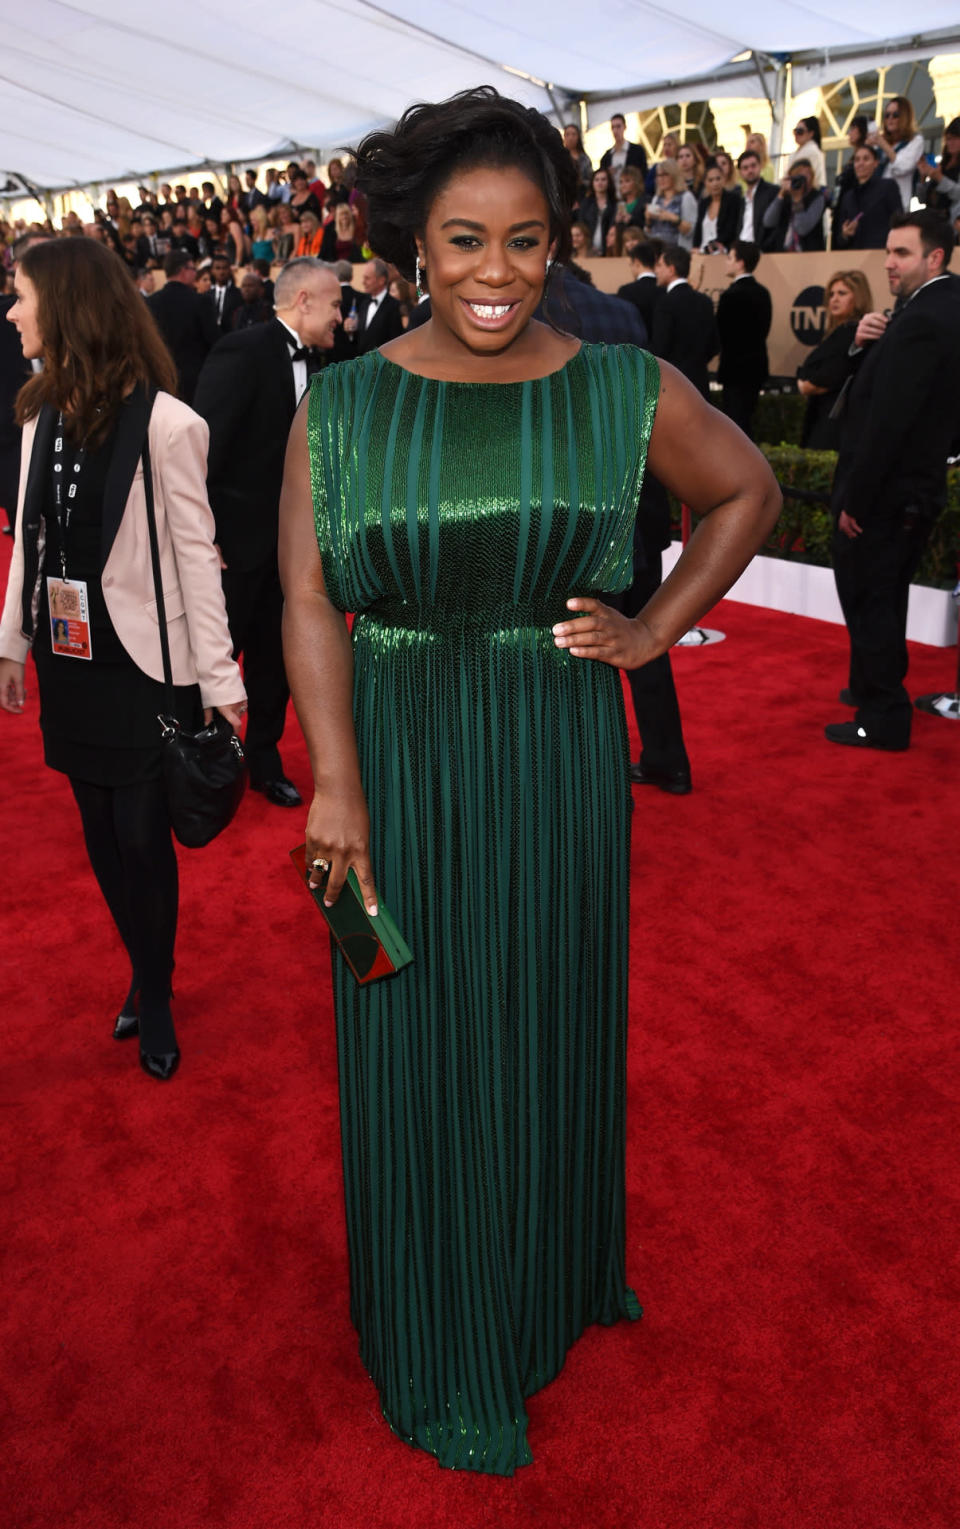 Uzo Aduba in an emerald green sequin gown by Zac Posen at the 22nd Annual Screen Actors Guild Awards at The Shrine Auditorium on January 30, 2016 in Los Angeles, California.